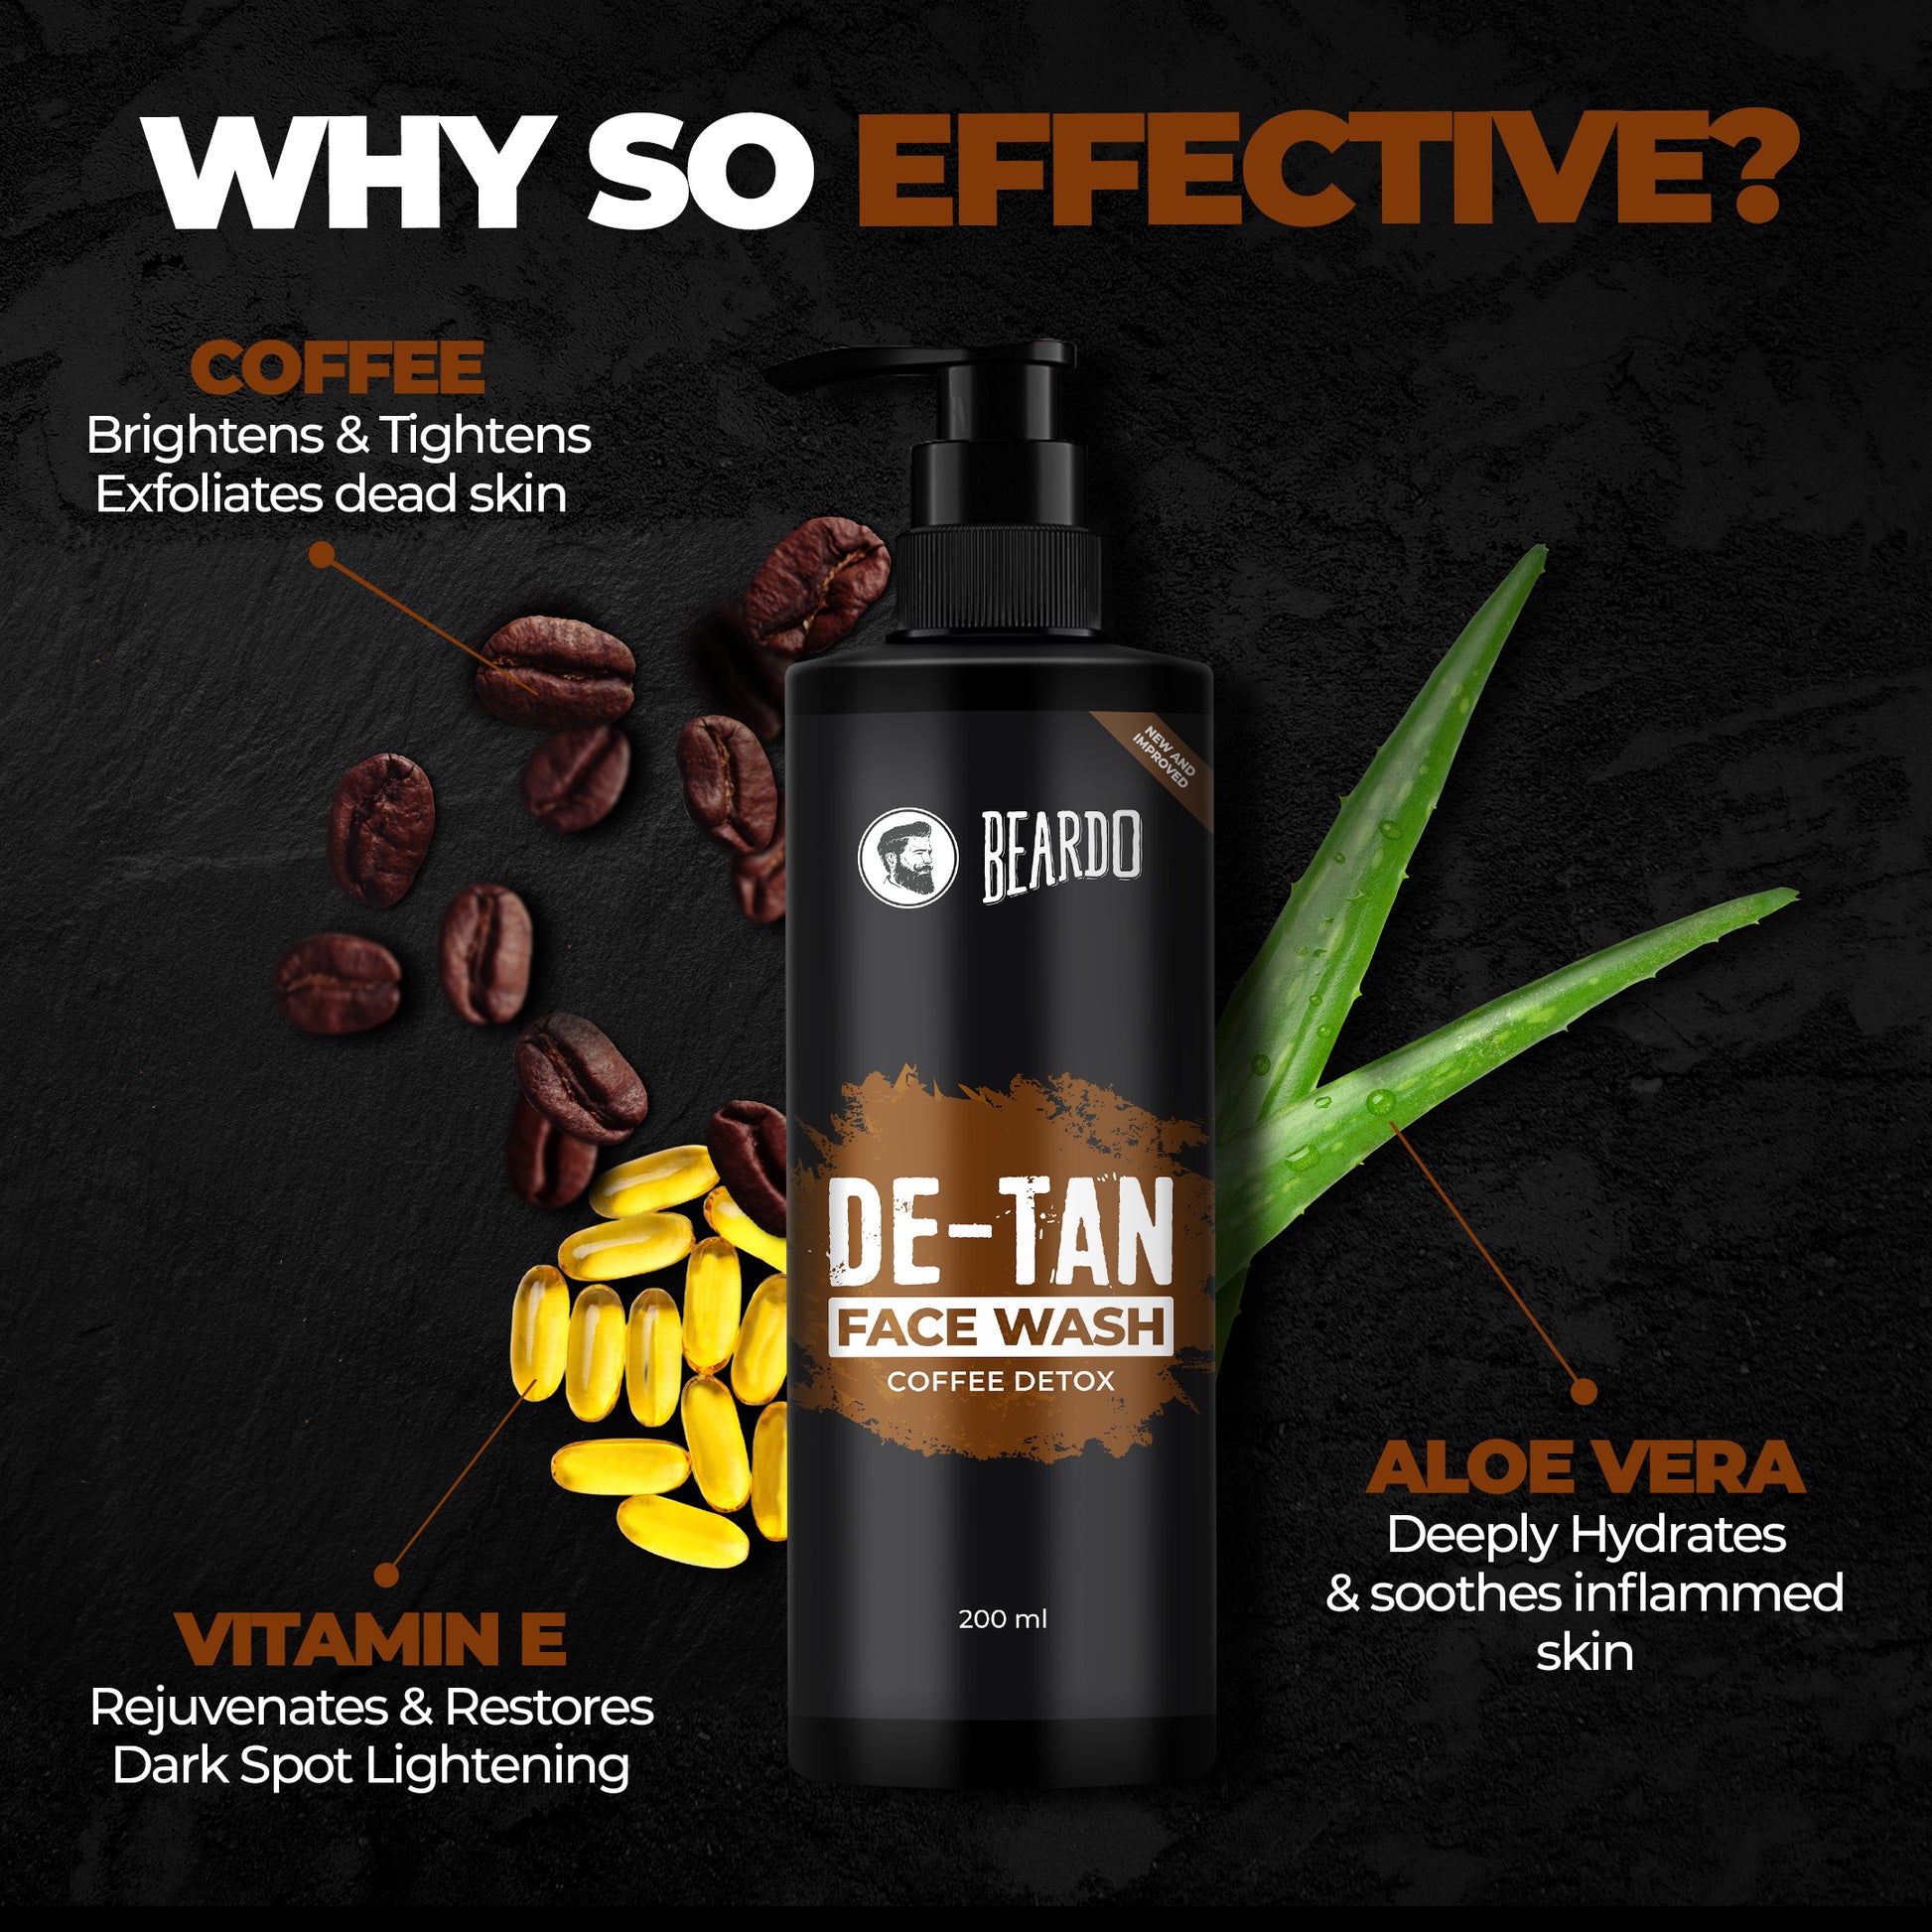 200ml,  Can we use D tan cleanser daily?, Which product can remove tan?, Does Beardo de Tan face wash work?, de tan cleanser, anti tan,  detan facewash for men, de tan facewash review, best tan removal facewash, de tan cleanser, best d tan facewash,  best facial cleanser, top 10 face wash in the world, top 10 face wash for men, top facewash for men, tan face wash, best facewash for men dry skin, d tan face wash price, beardo de tan face wash, men's skin whitening face wash